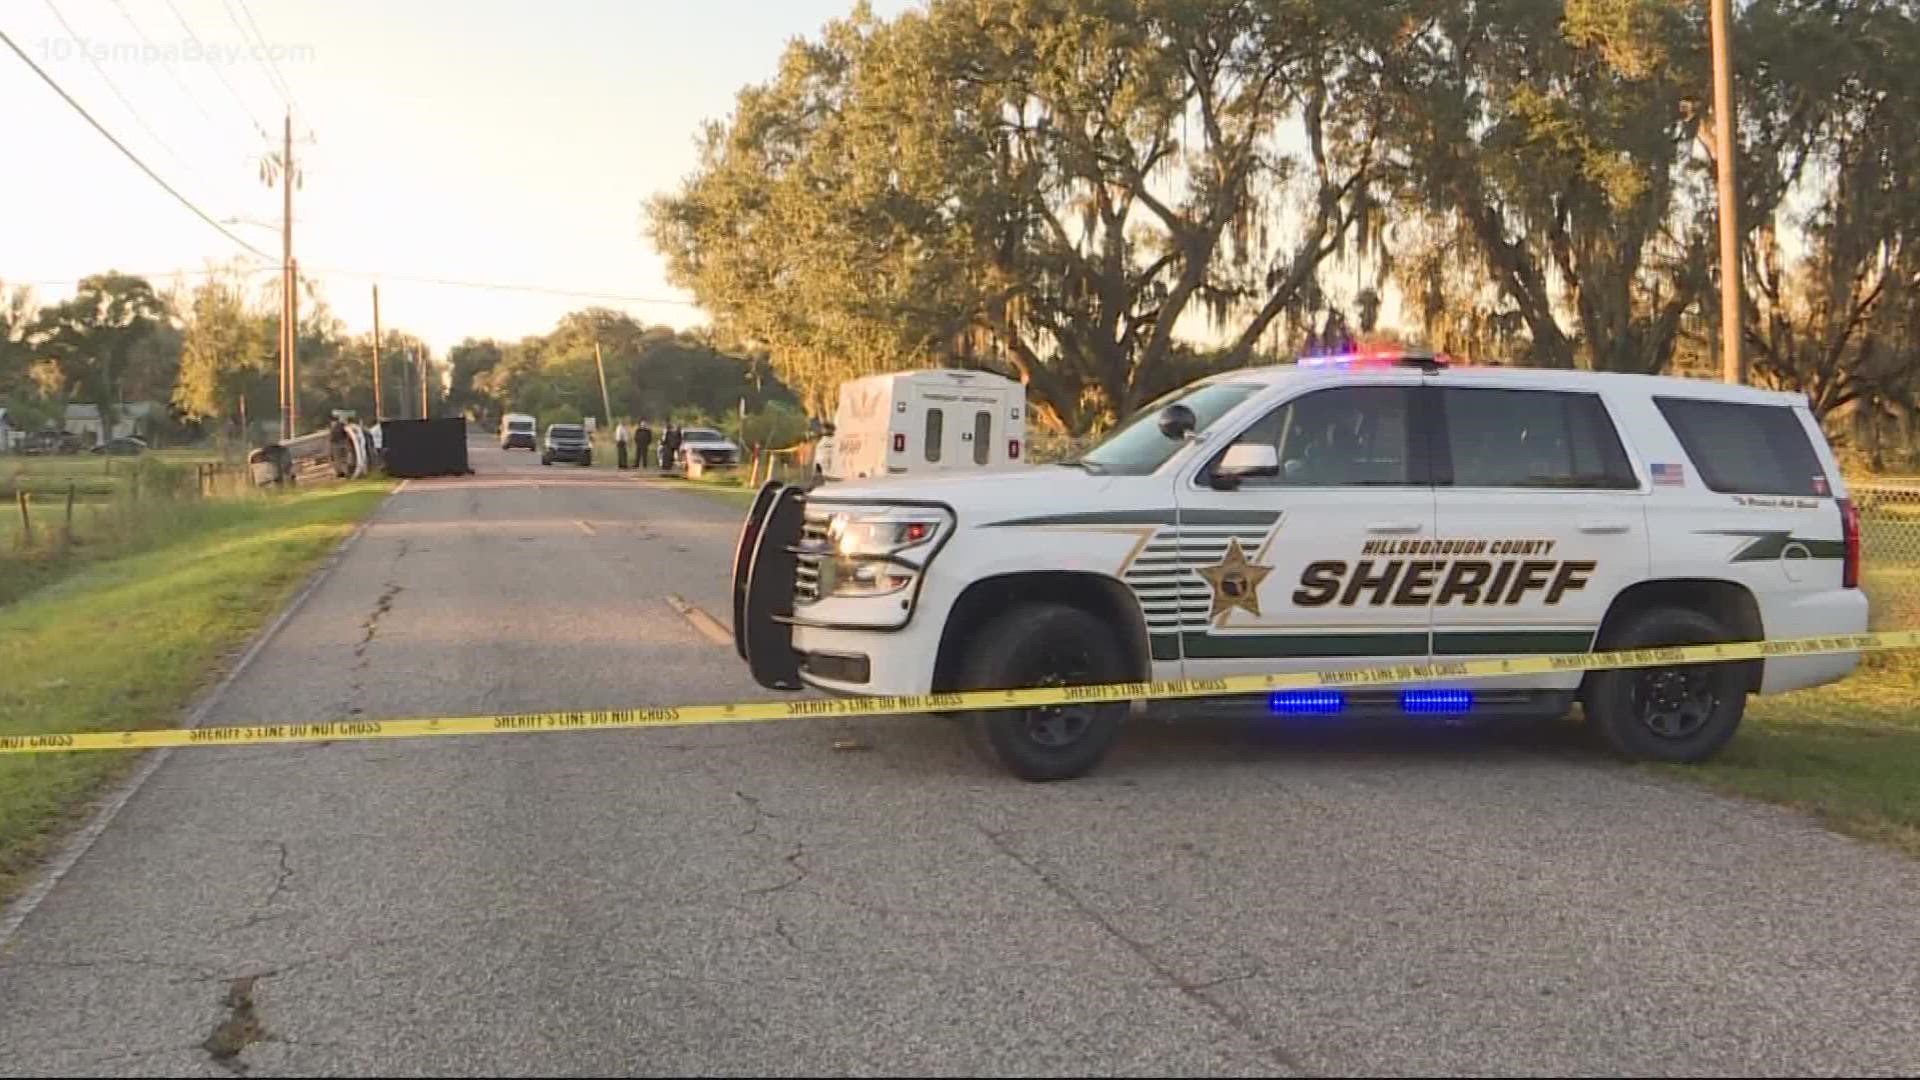 Two Hillsborough County deputies were found dead after a possible murder-suicide at a vacation rental home in St. Augustine.